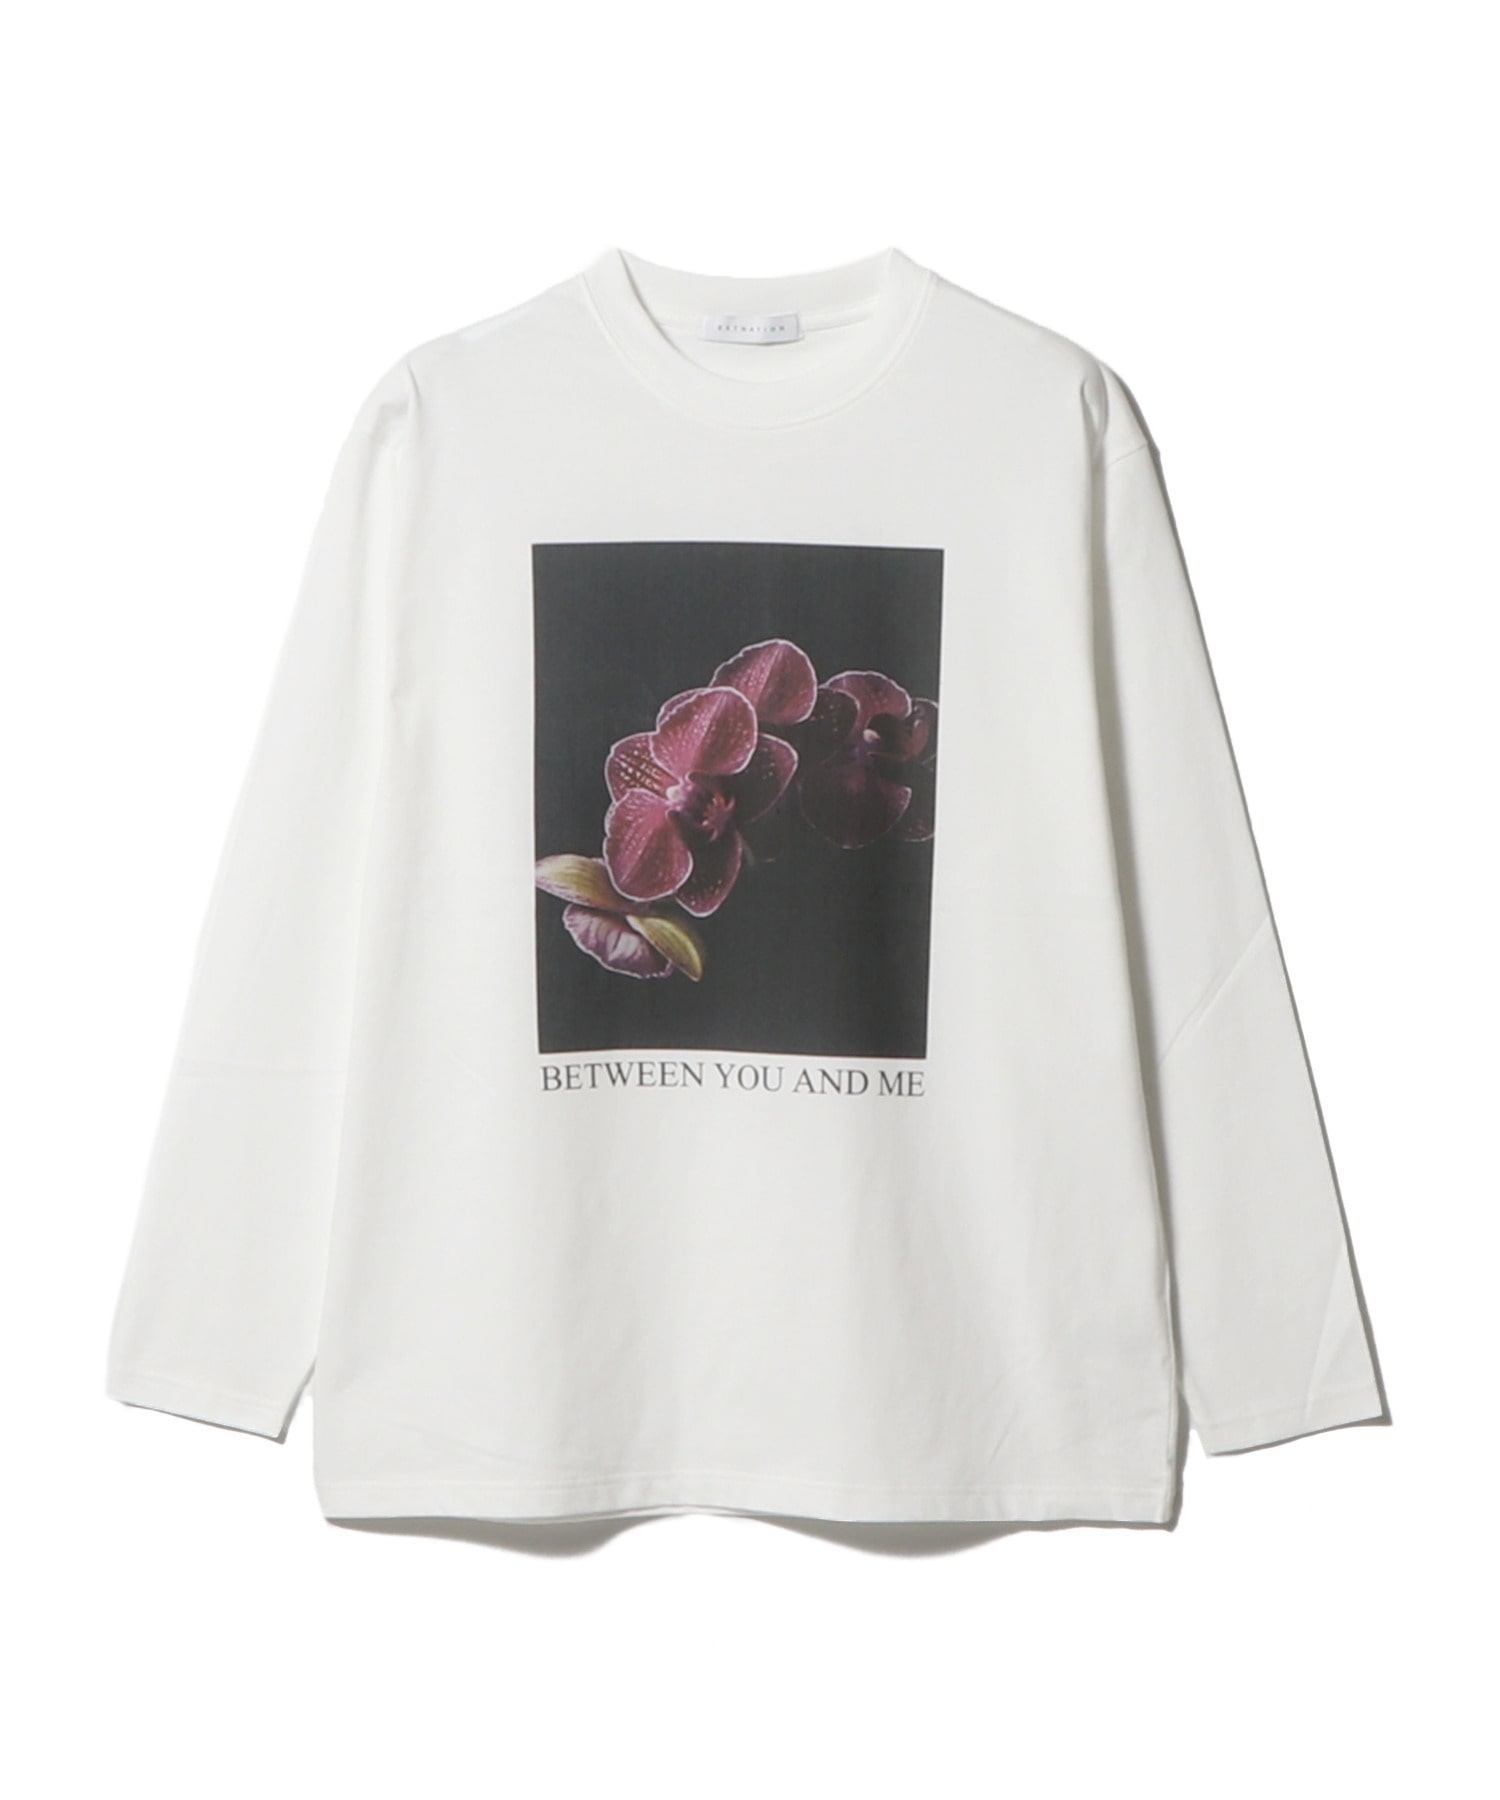 BETWEEN YOU AND ME ロングスリーブTシャツ